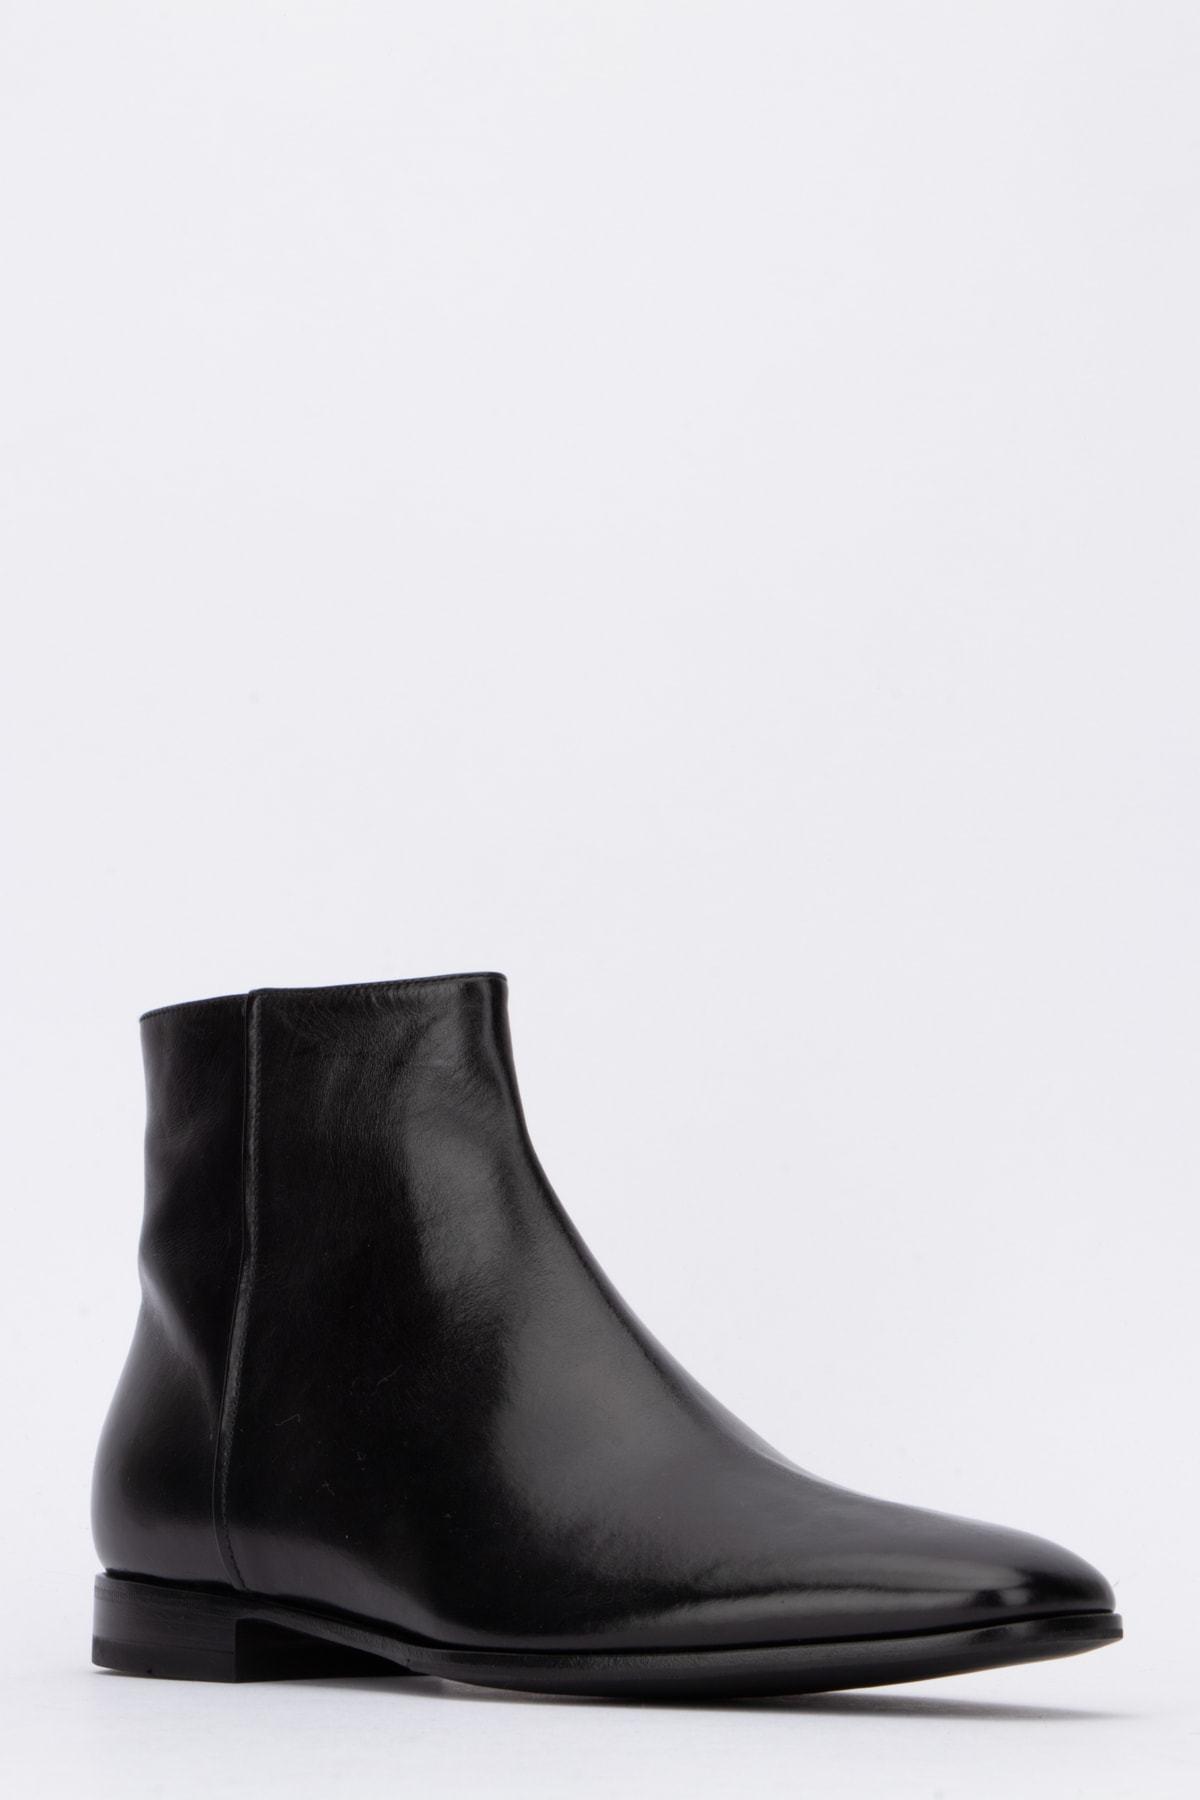 Prada Leather Zipped Ankle Boots in 